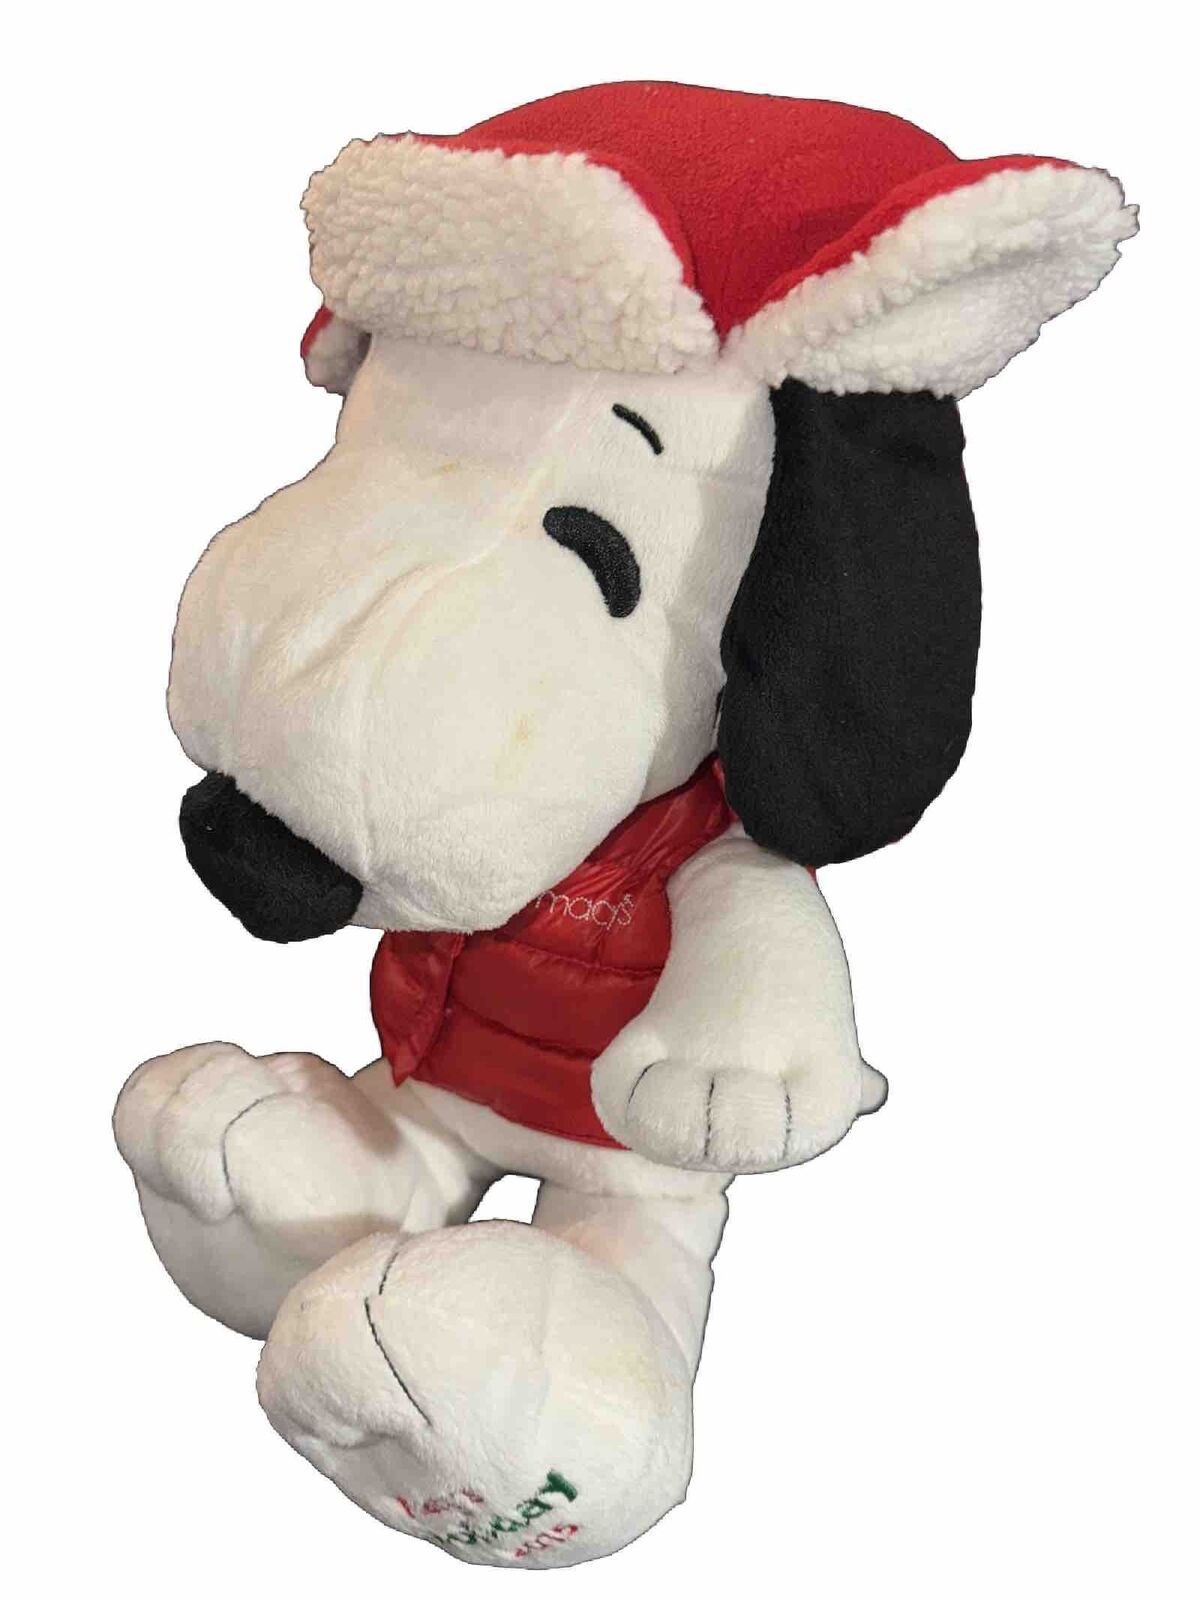 Snoopy Plush Macy’s Holiday 2015 with Macy’s Jacket & Winter Hat